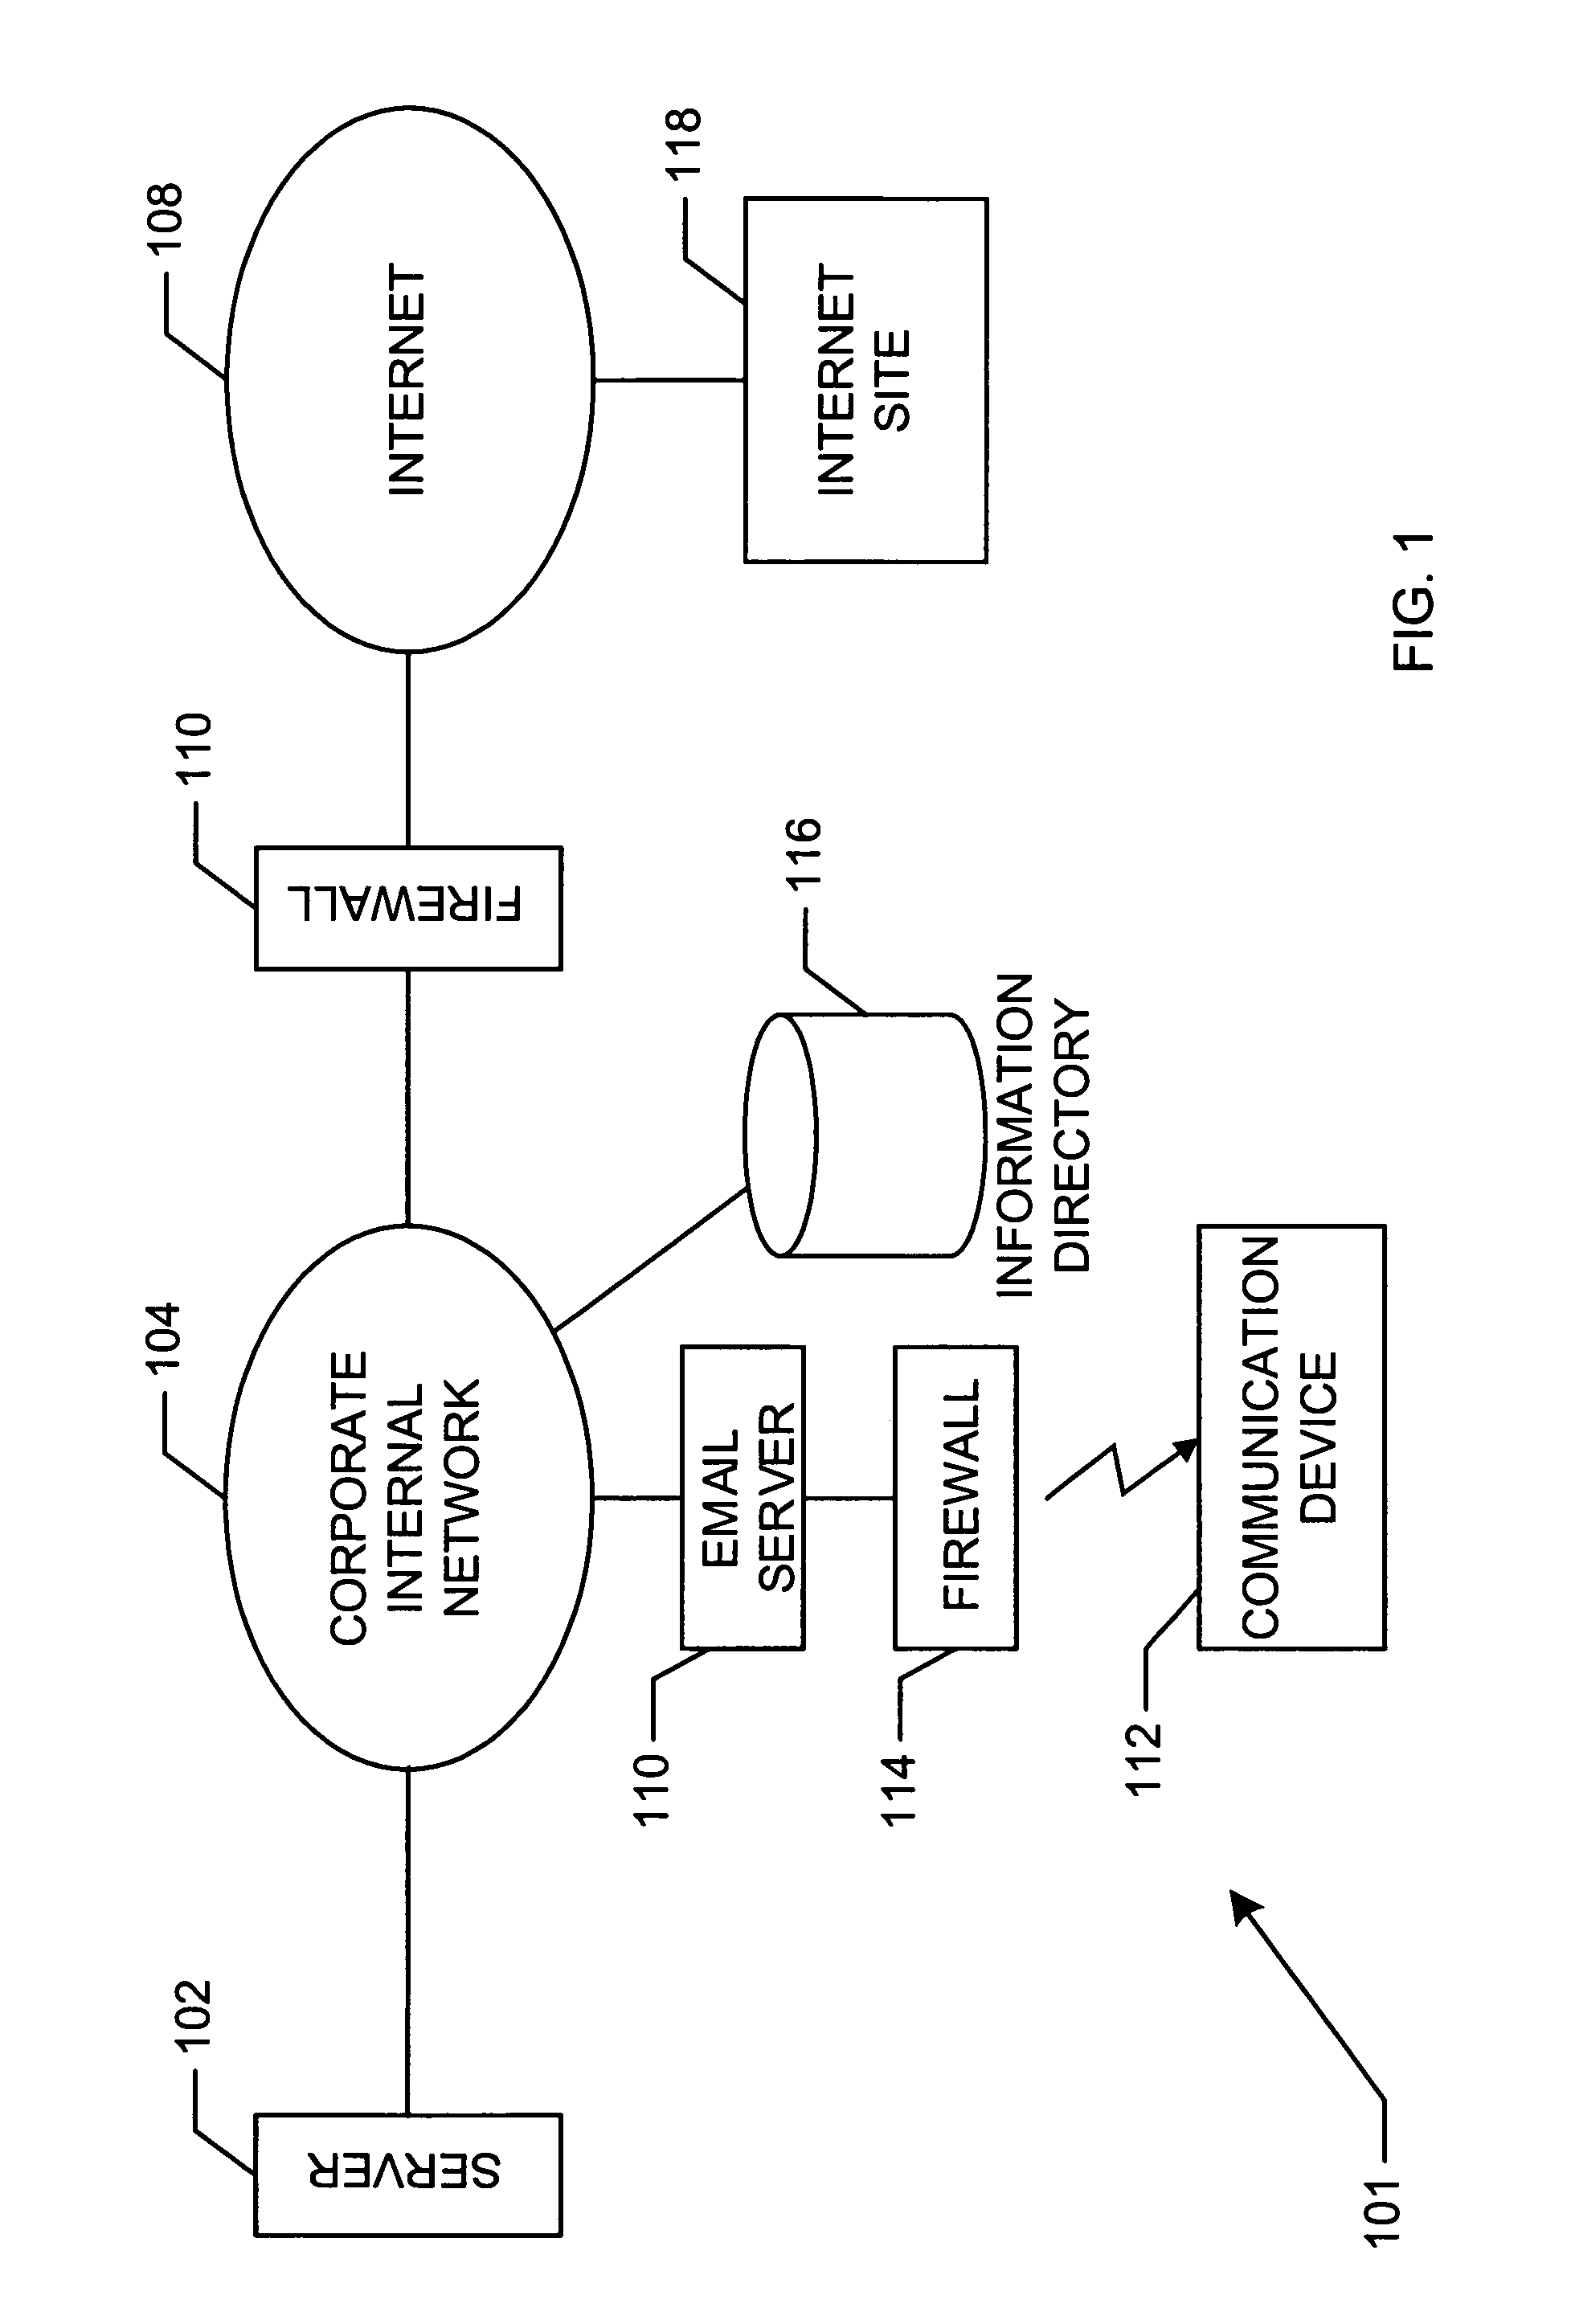 System and method for finding persons in a corporate entity